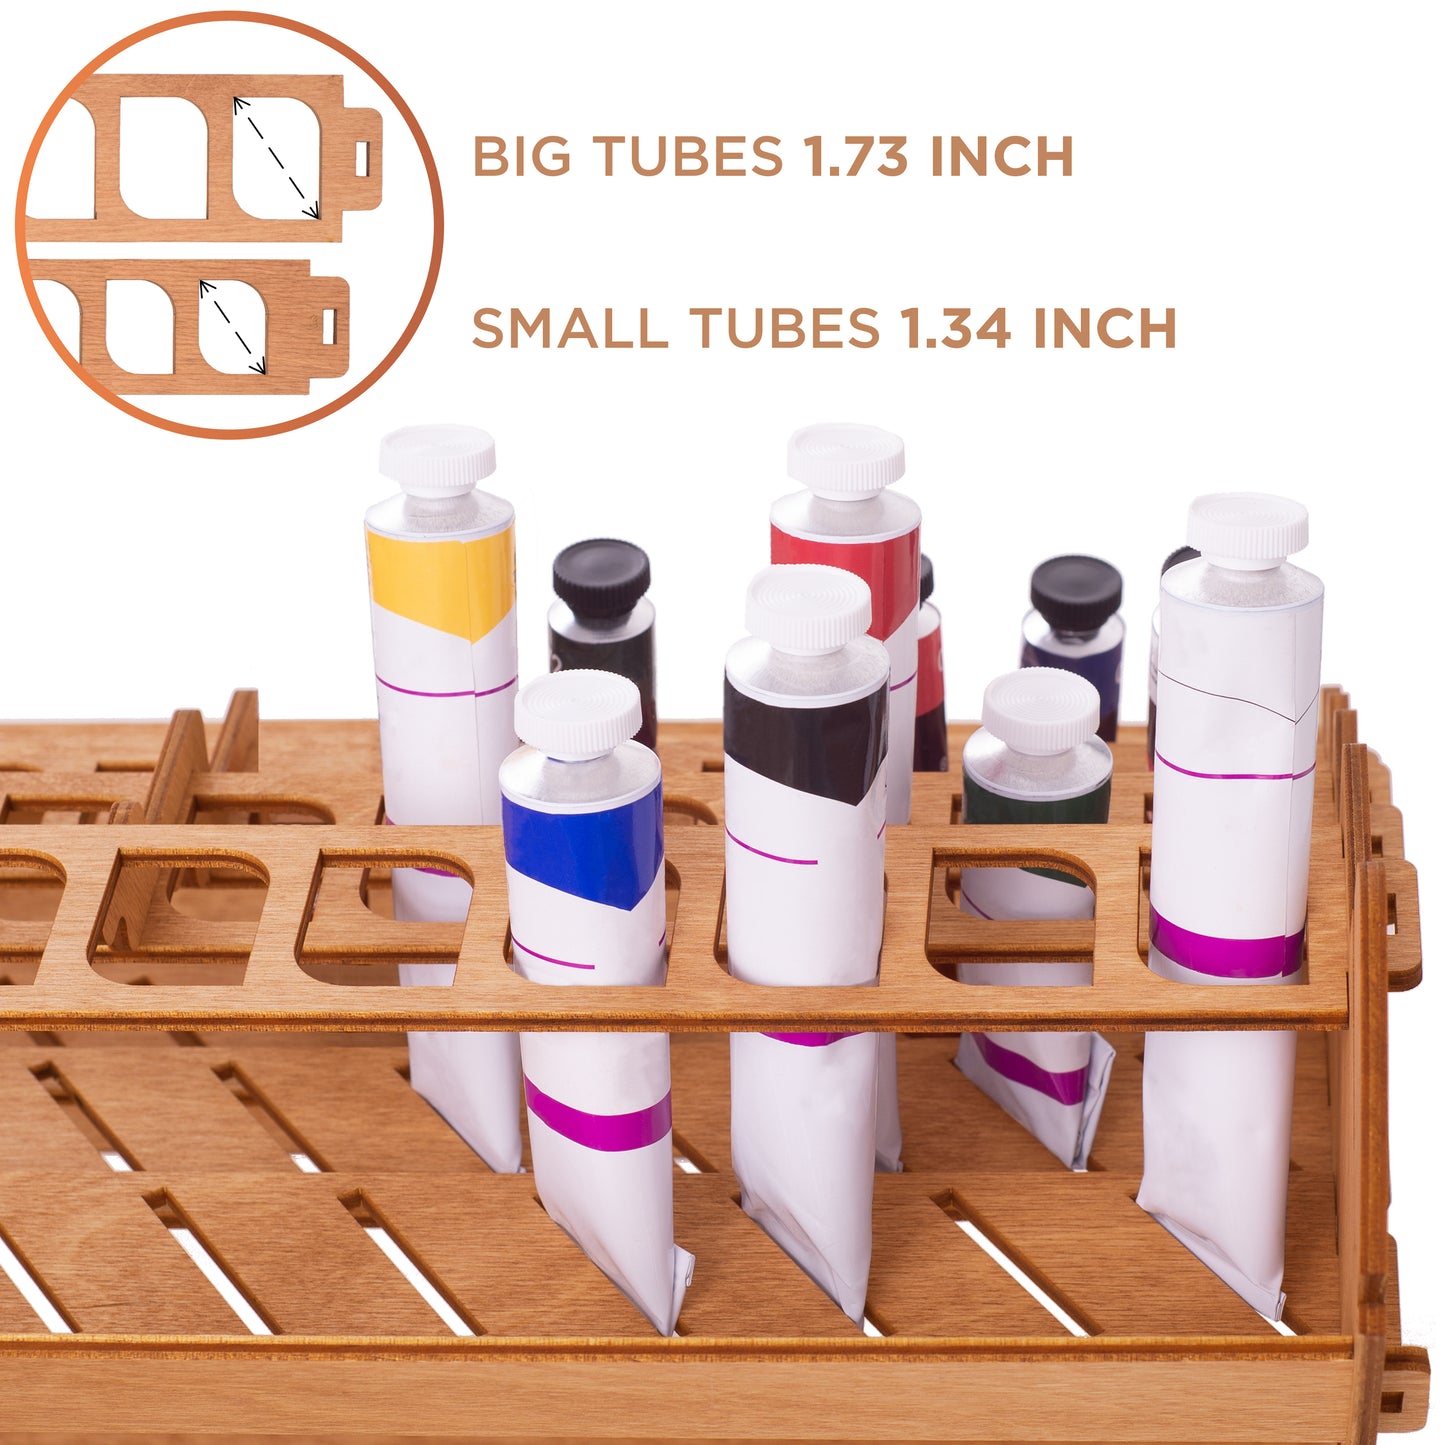 PLYDOLEX Modular Paint Tube Organizer for 52 Bottles of Paints and 22 Paint Brushes - Paint Tube Holder Suitable for Oil, Watercolor, Acrylic Paints